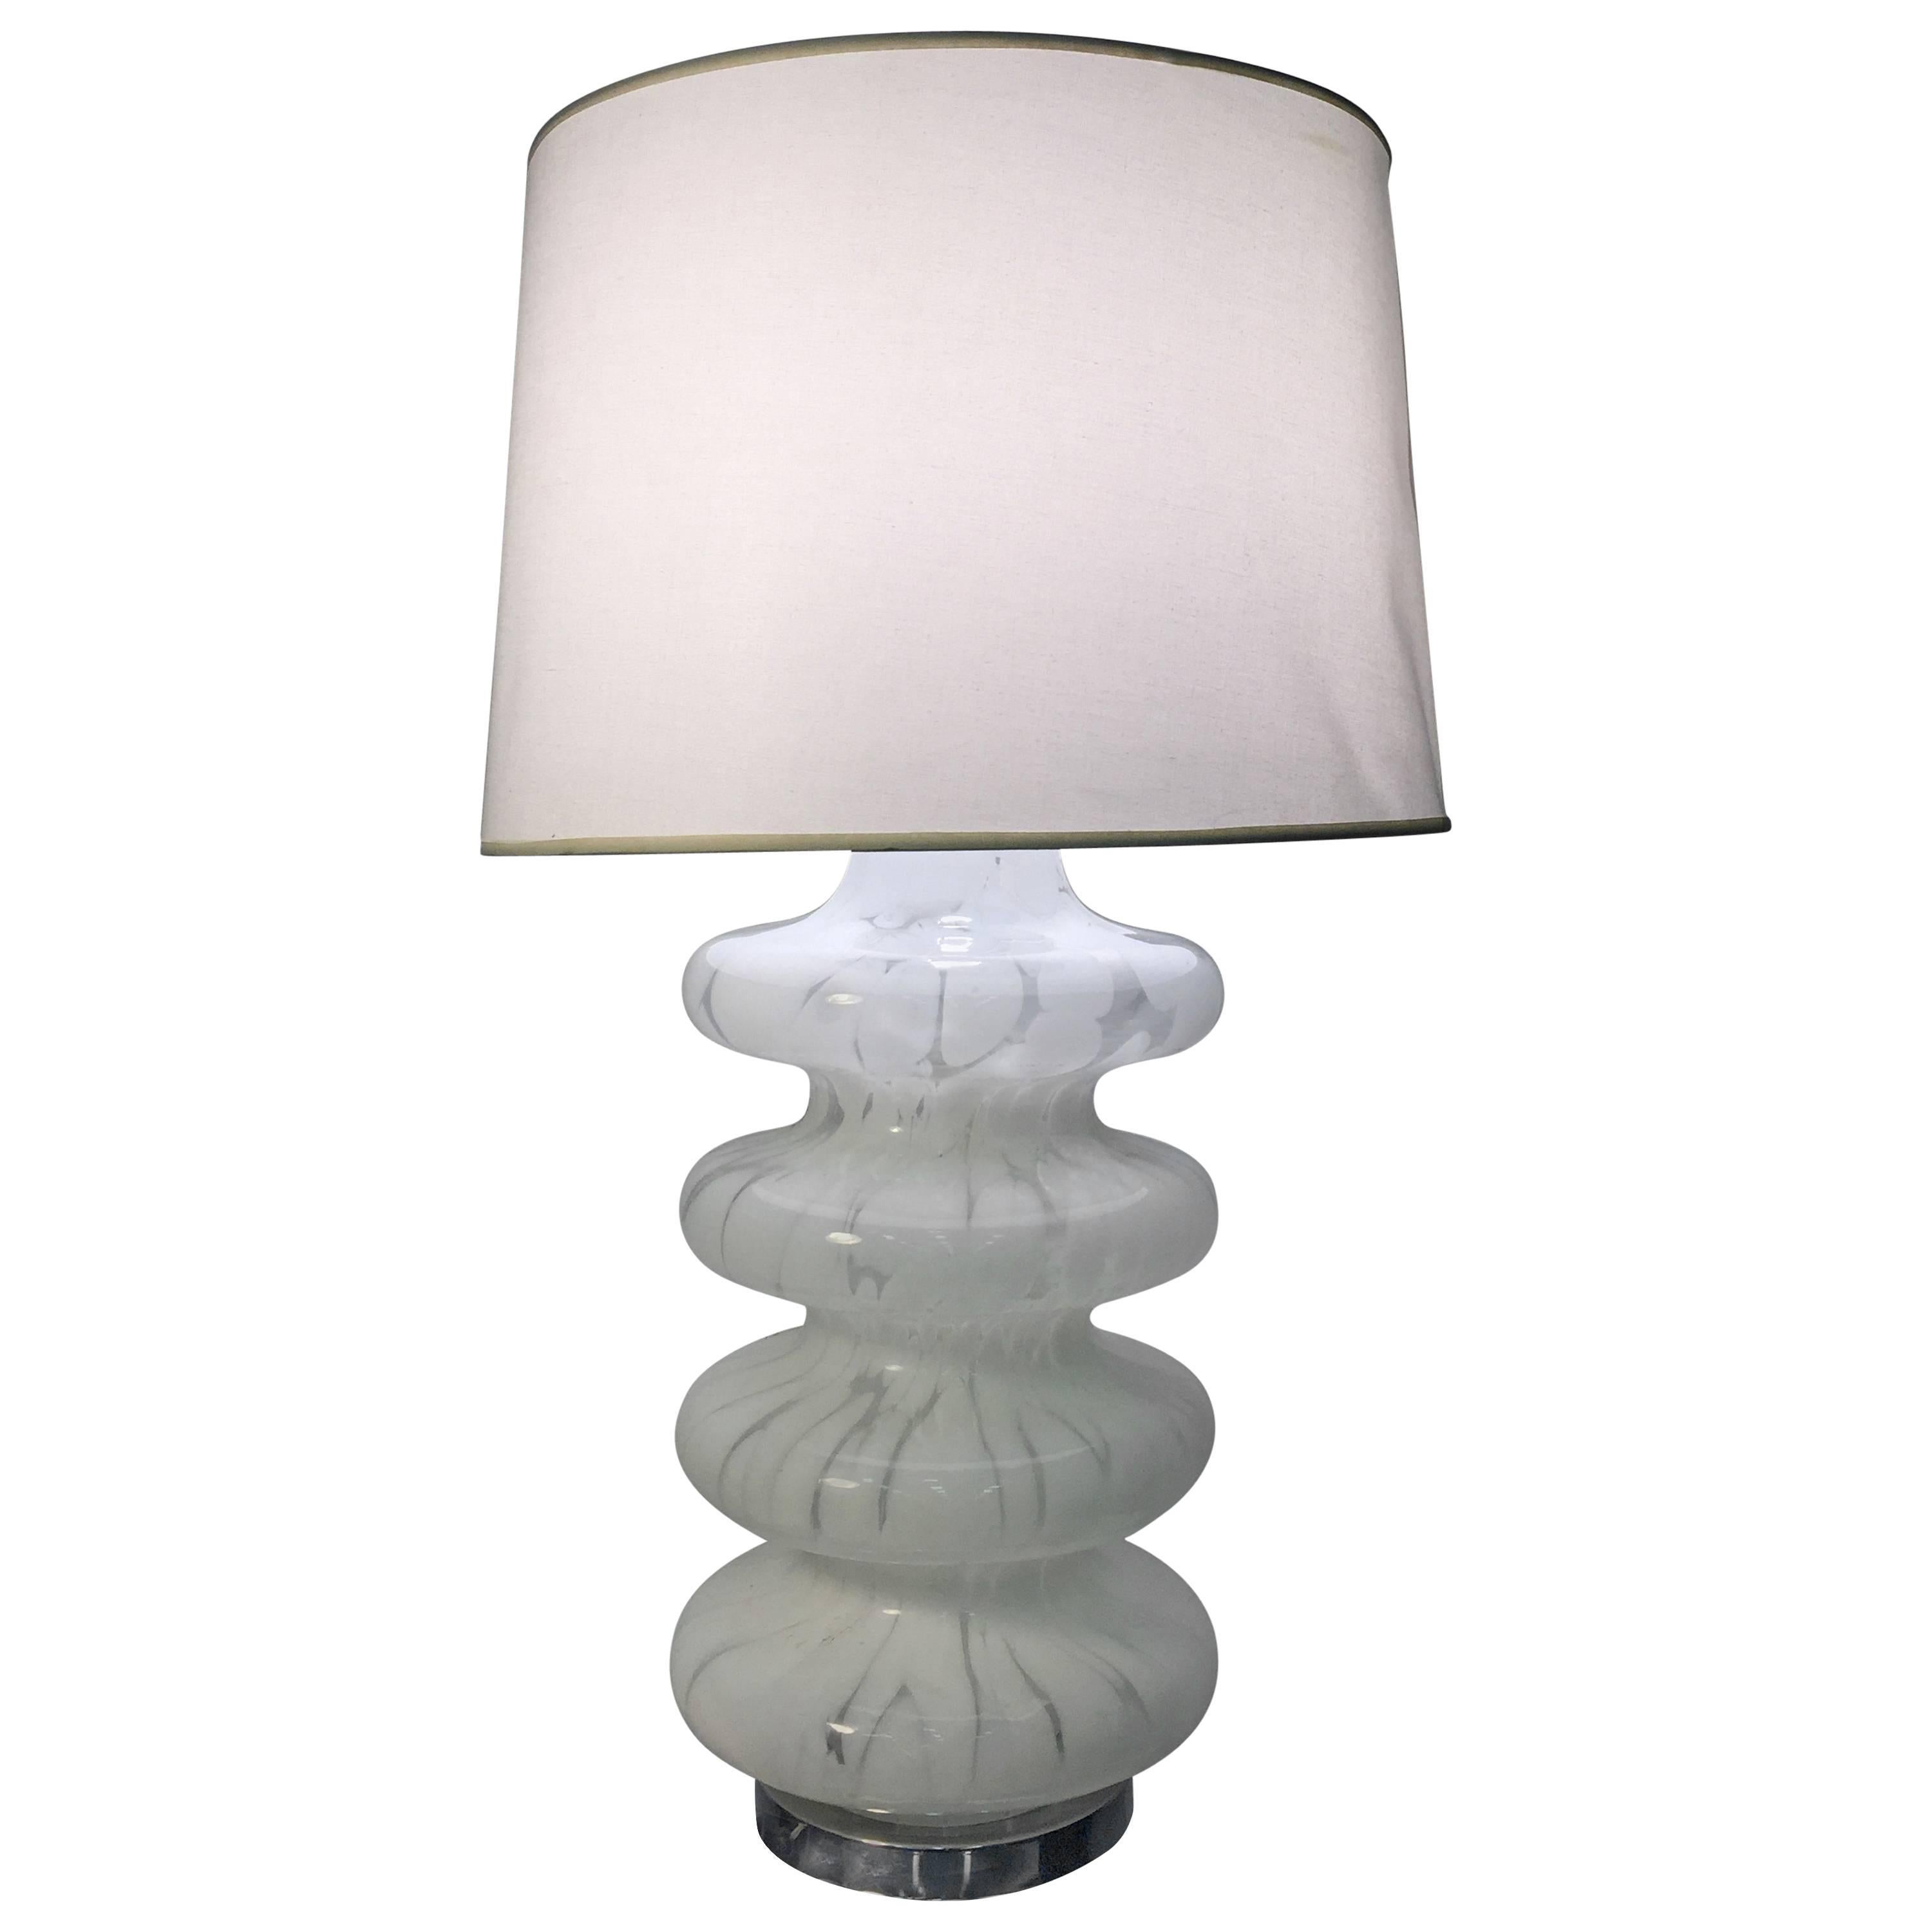 Wonderful White and Clear Murano Glass Table Lamp by Barovier & Toso, circa 1960 For Sale